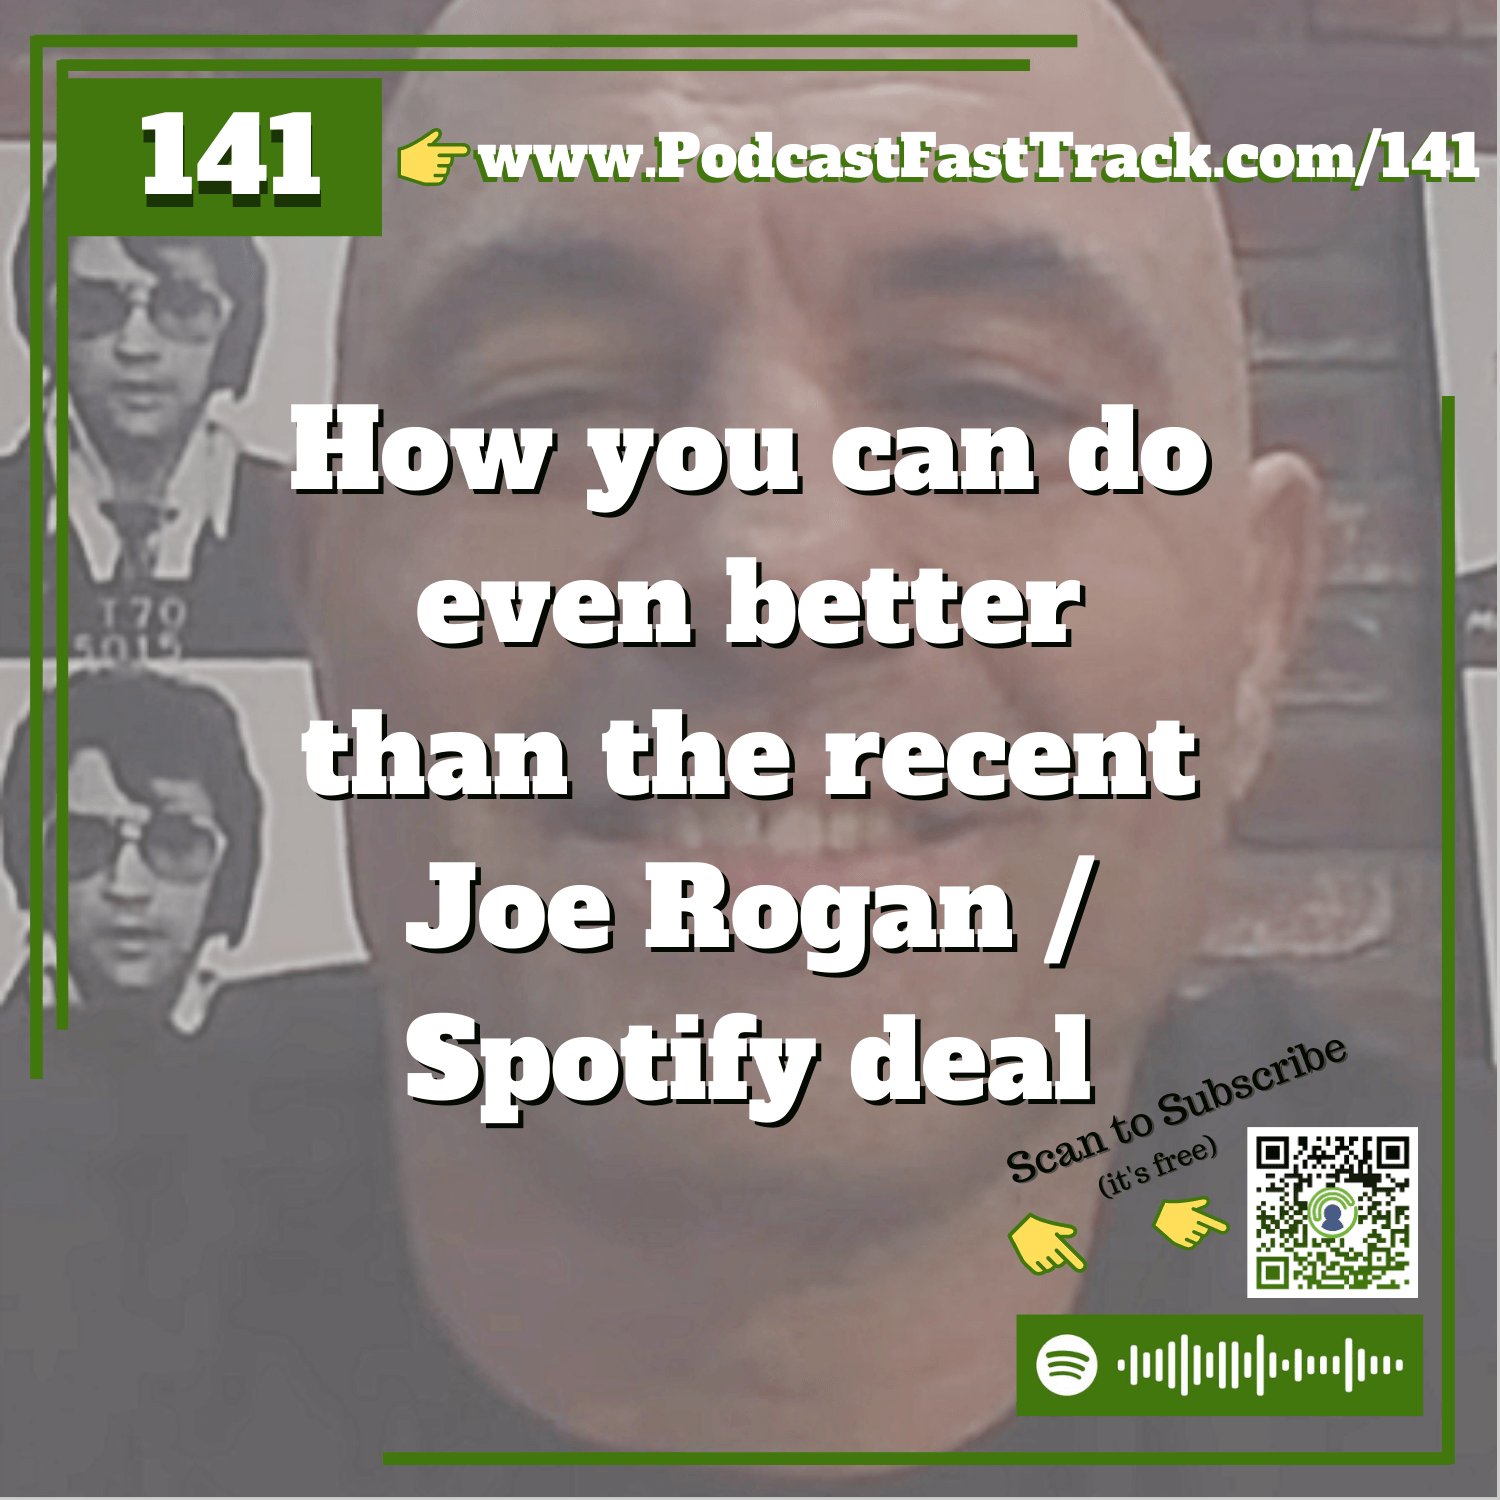 141: Why you should NOT compare yourself or your podcast to Joe Rogan